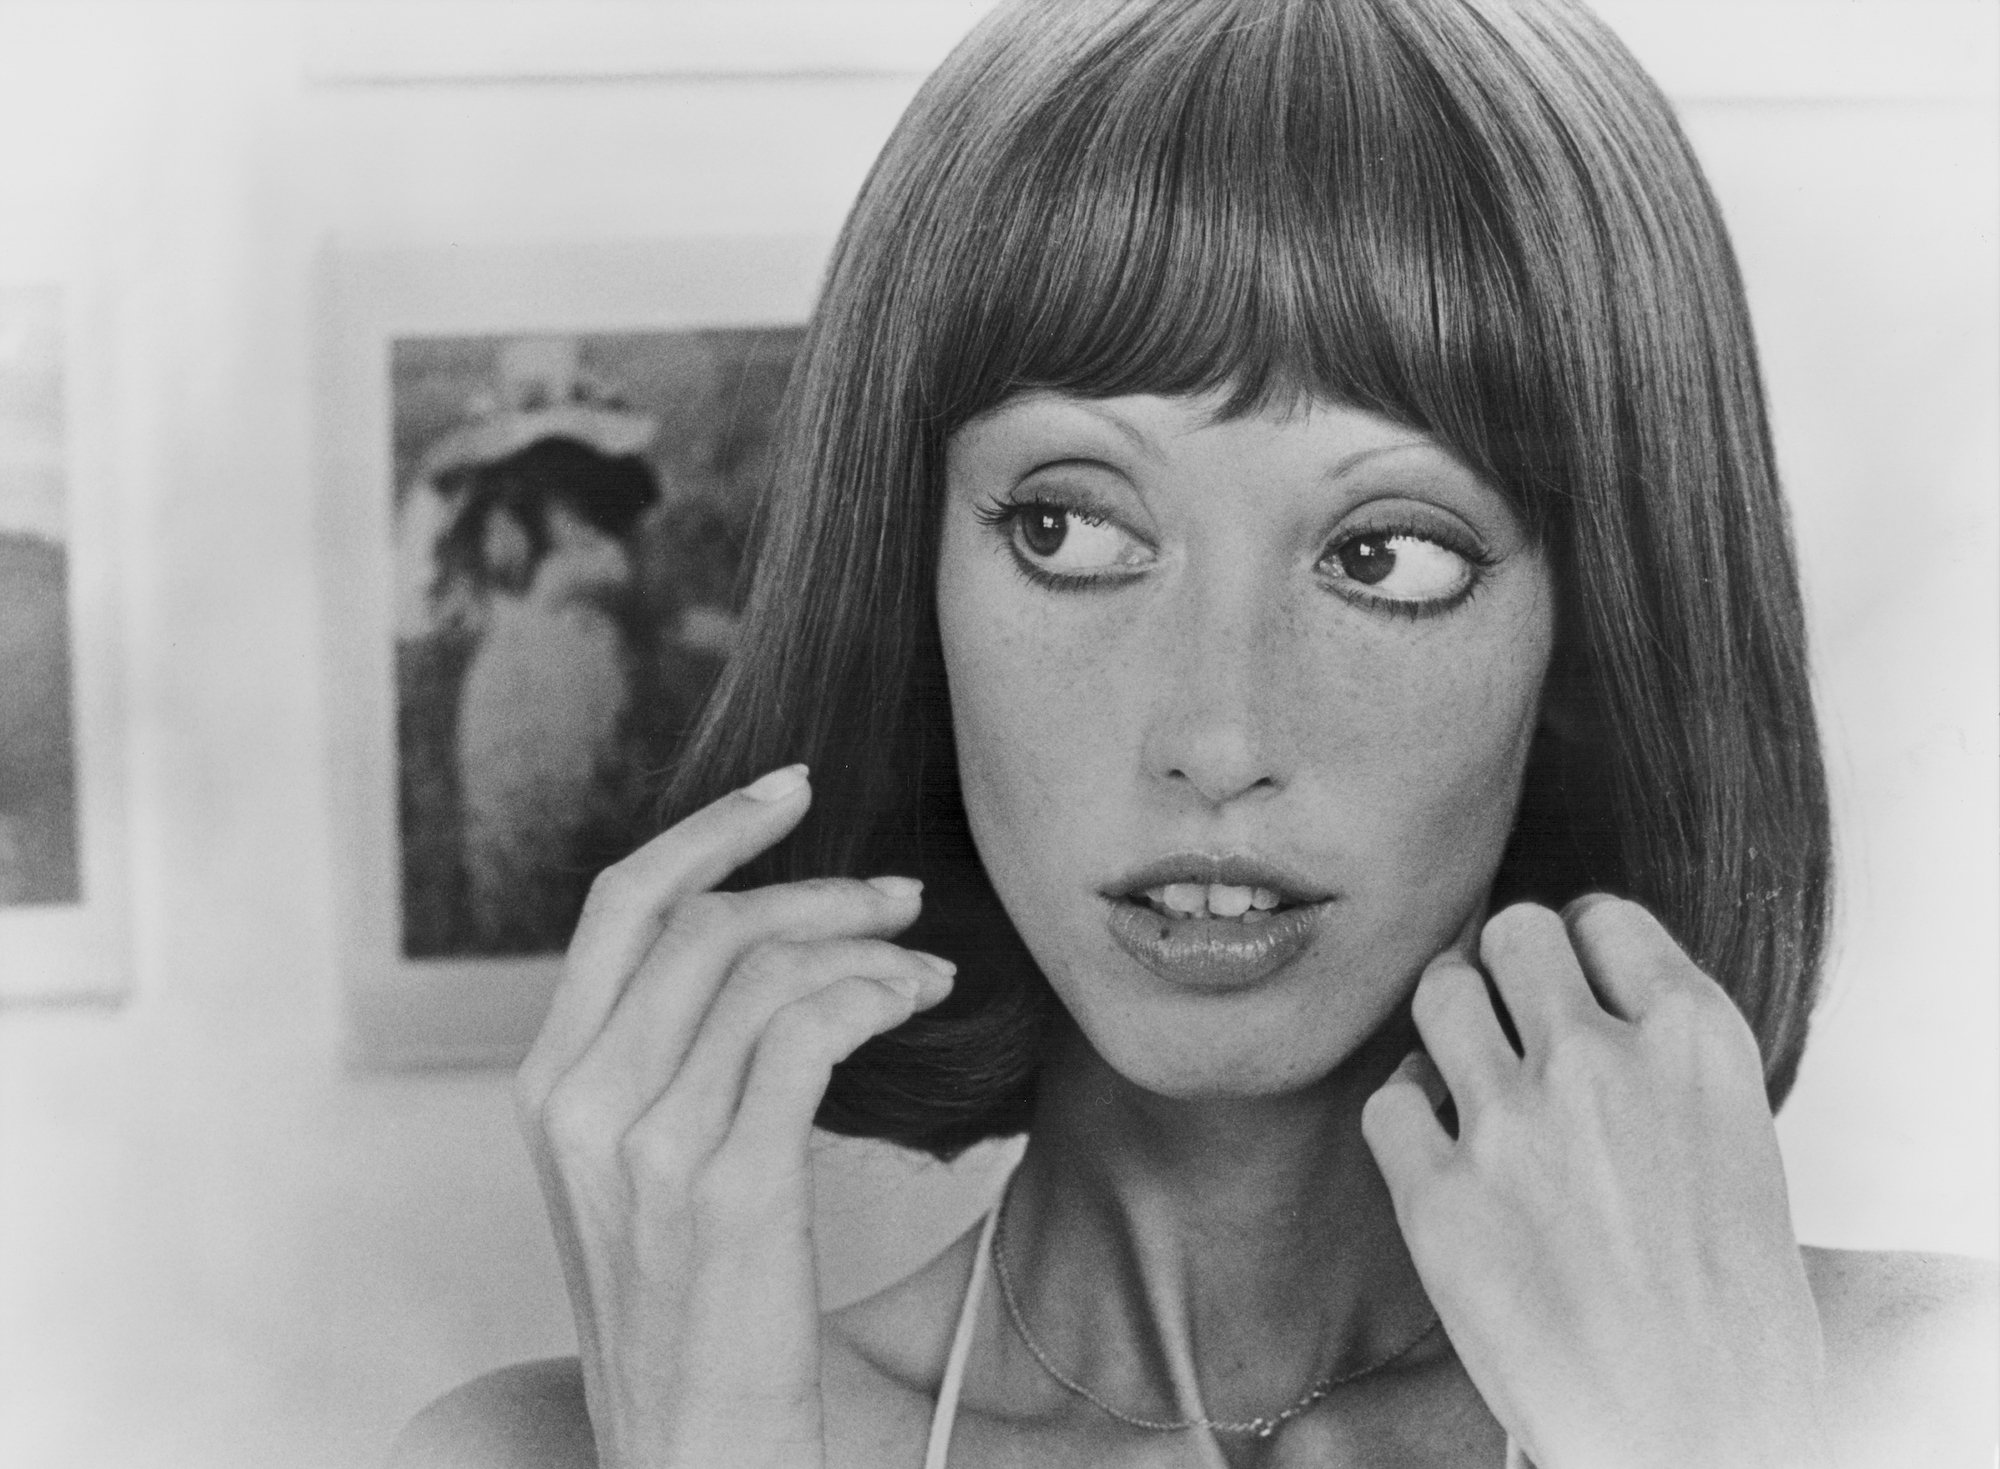 Shelley Duvall looking to the side, holding her hands to her face, in black and white